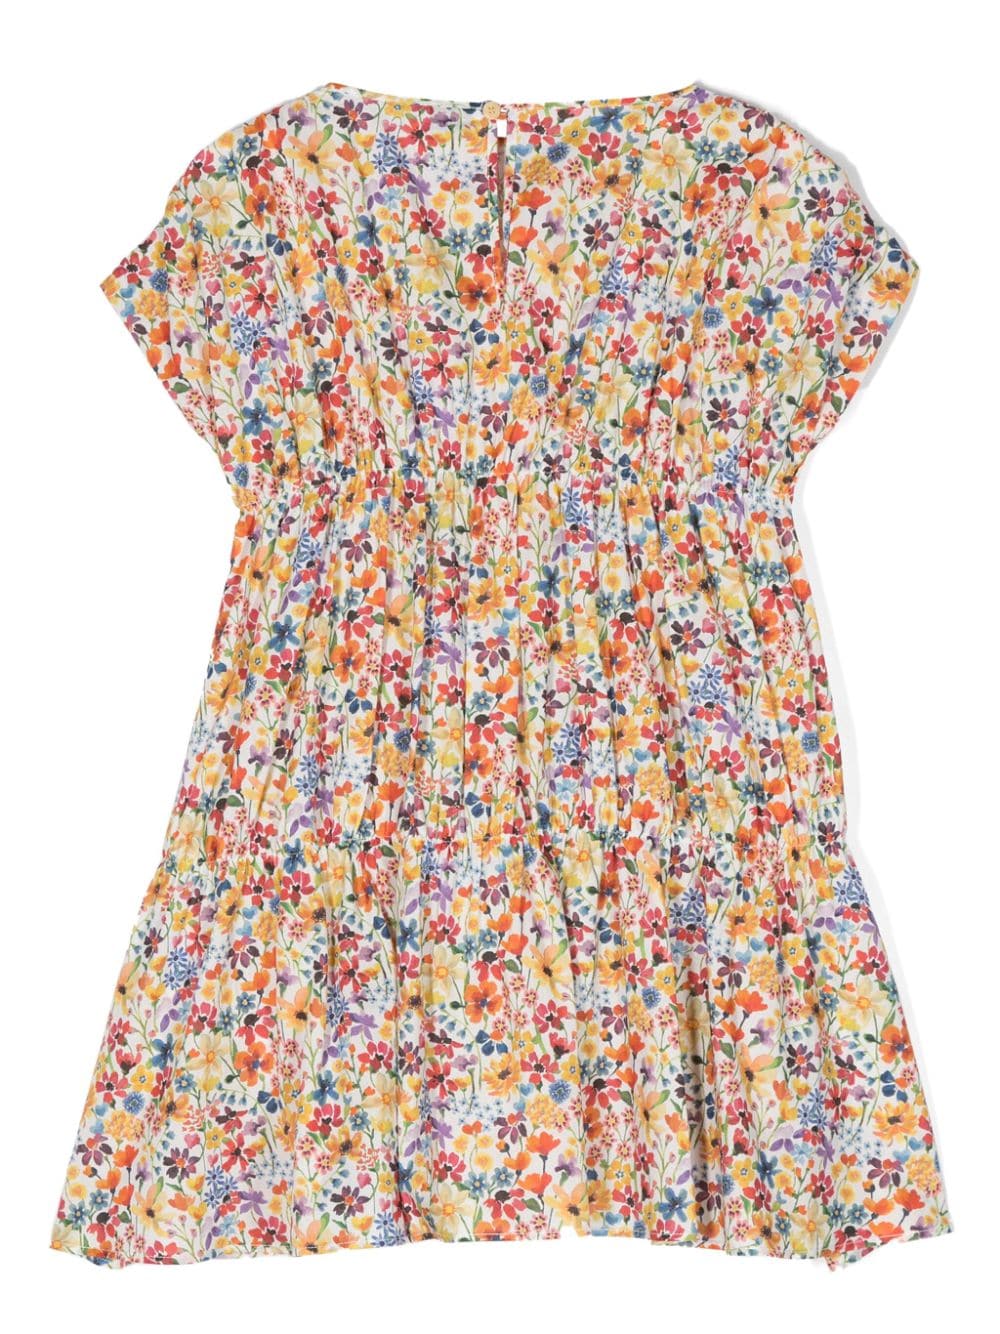 Multicolored dress for girls with print